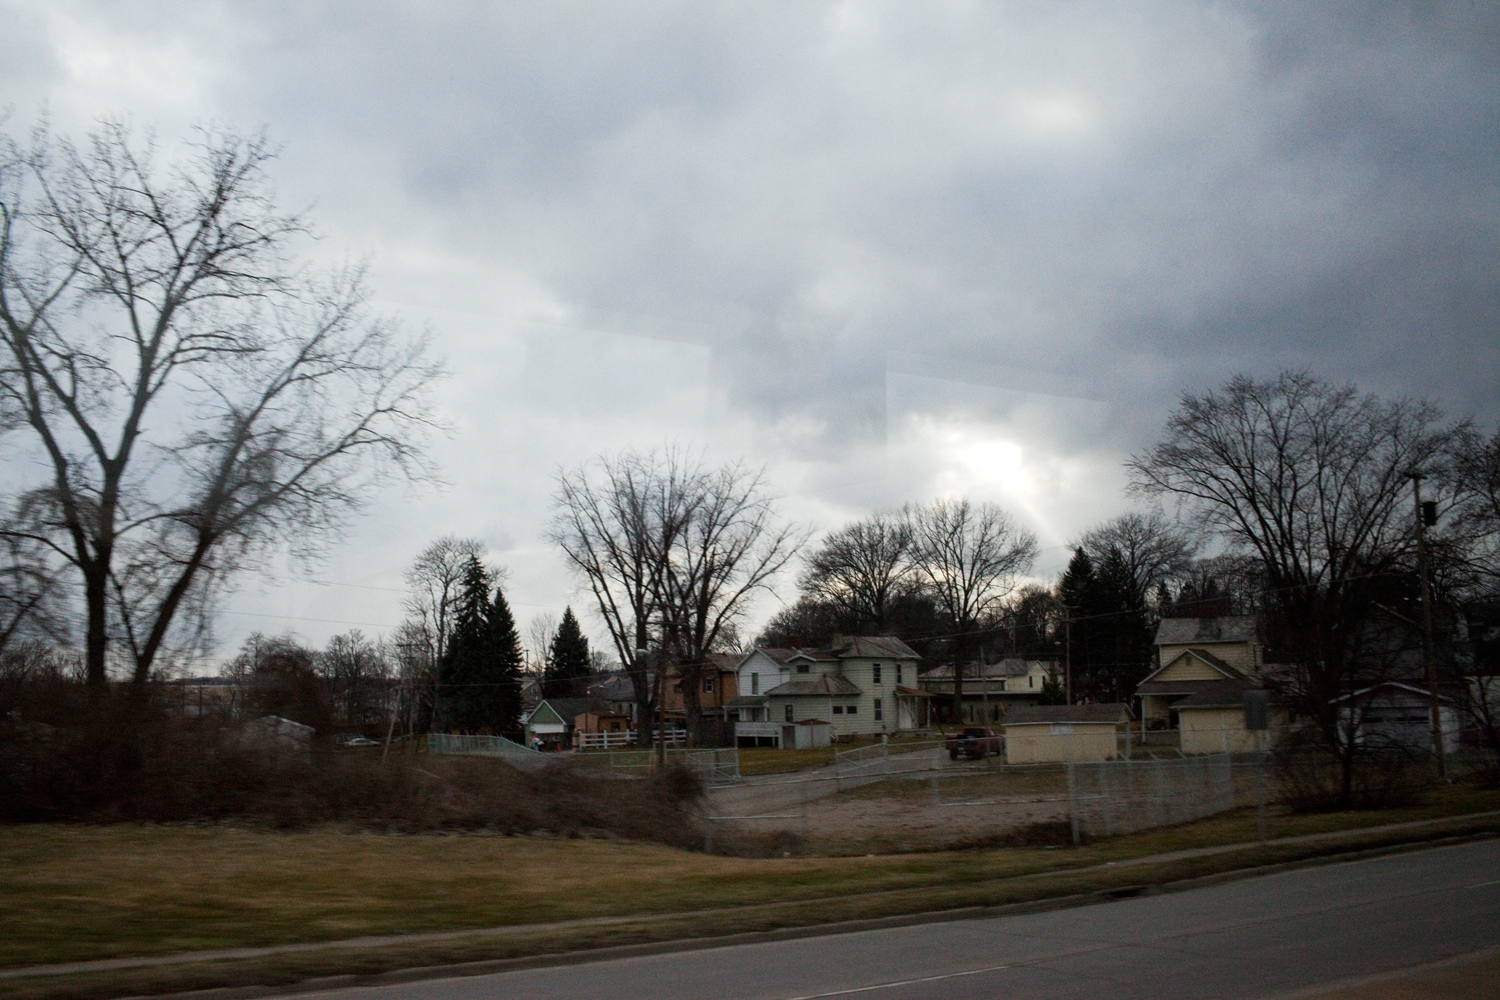 March 5, 2012. The view from the Mitt Romney campaign bus on the way to Zanesville, Ohio.